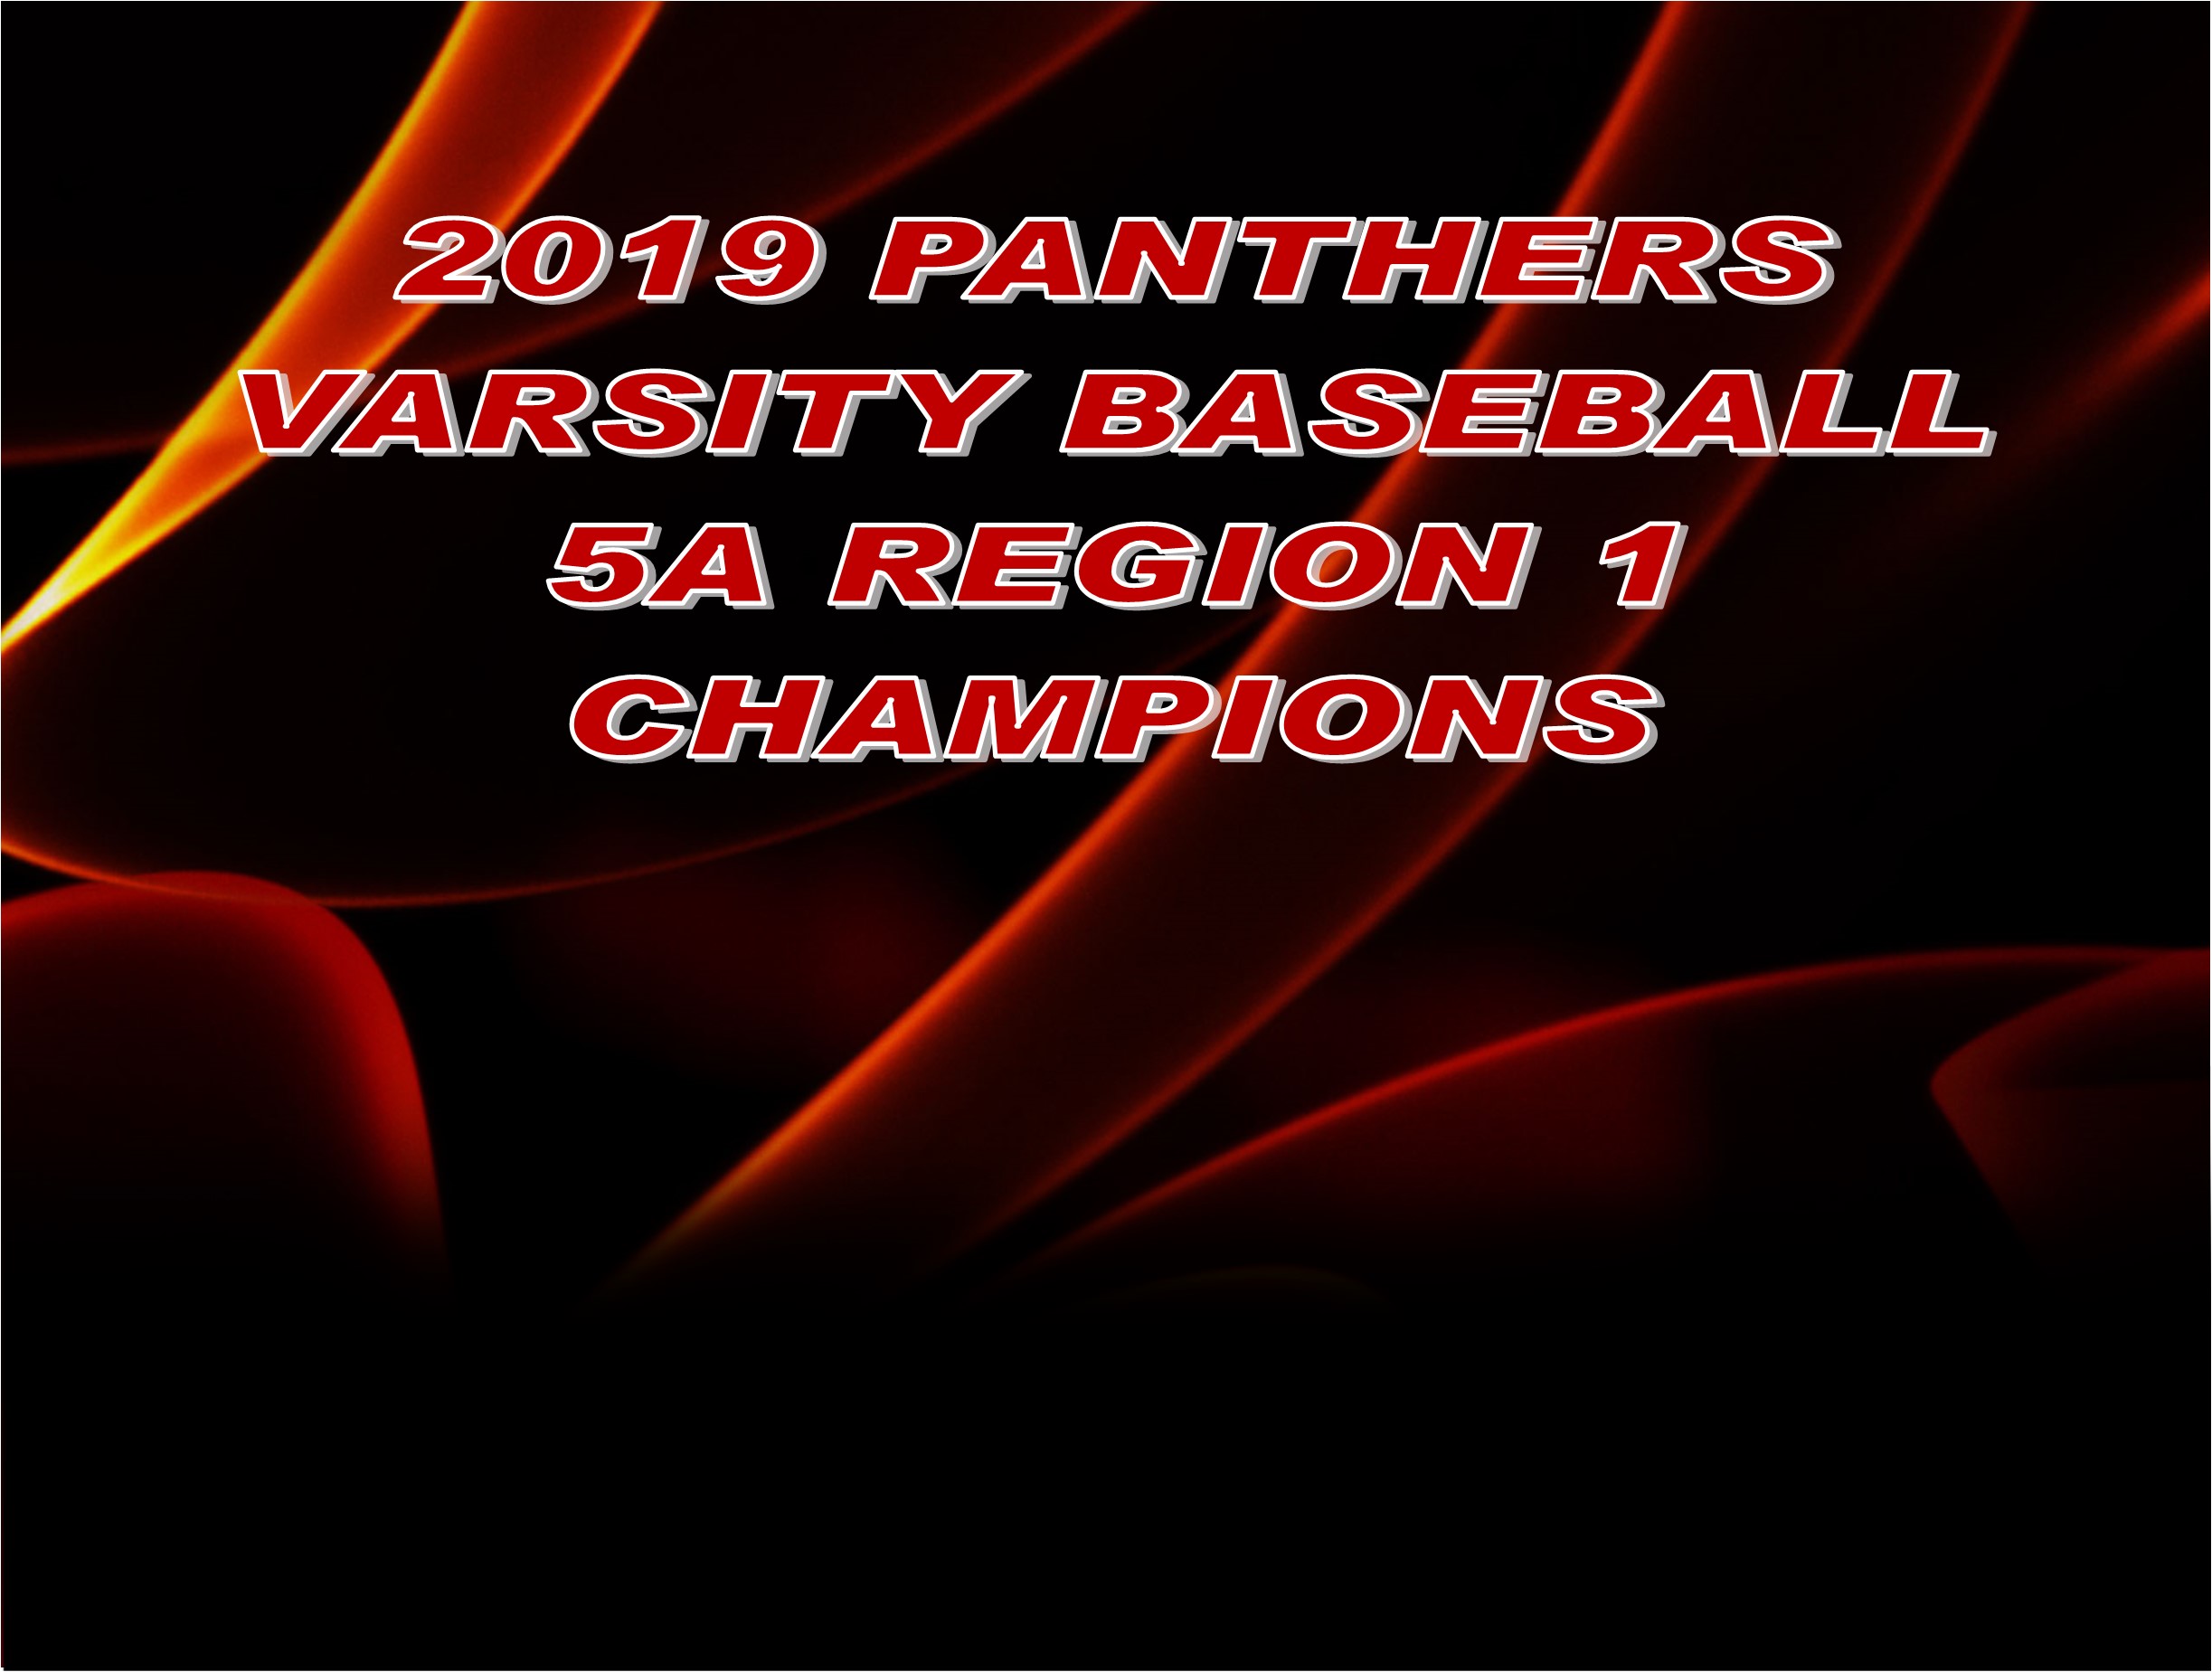 Baseball: Colleyville Panthers Defeat the Lubbock Monterey Plainsmen to Win 5A Region 1 Championship